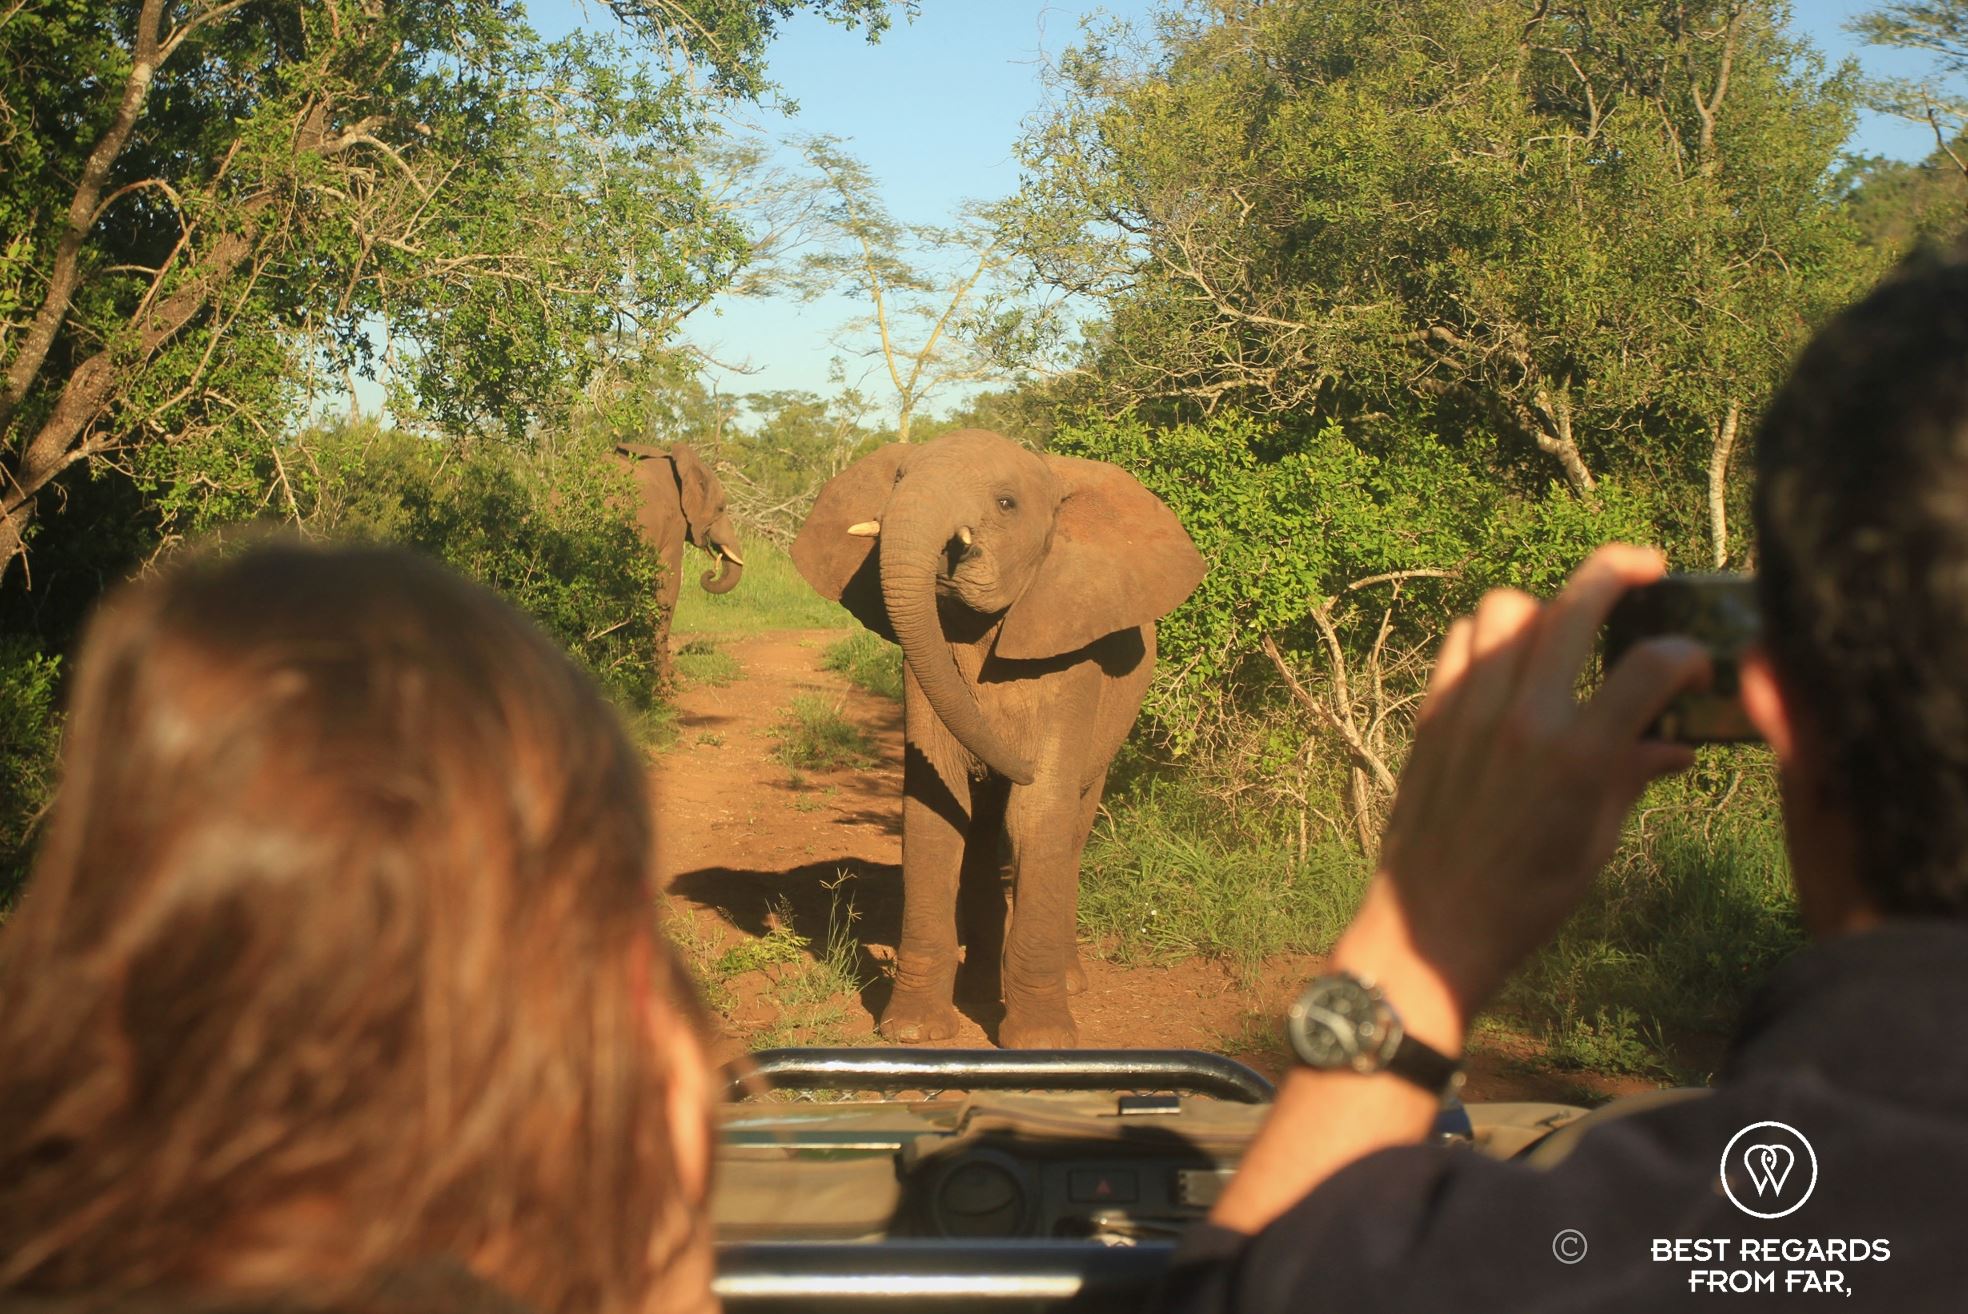 People taking a photo of a teenage elephant showing off in front of a game drive vehicle in the bush.